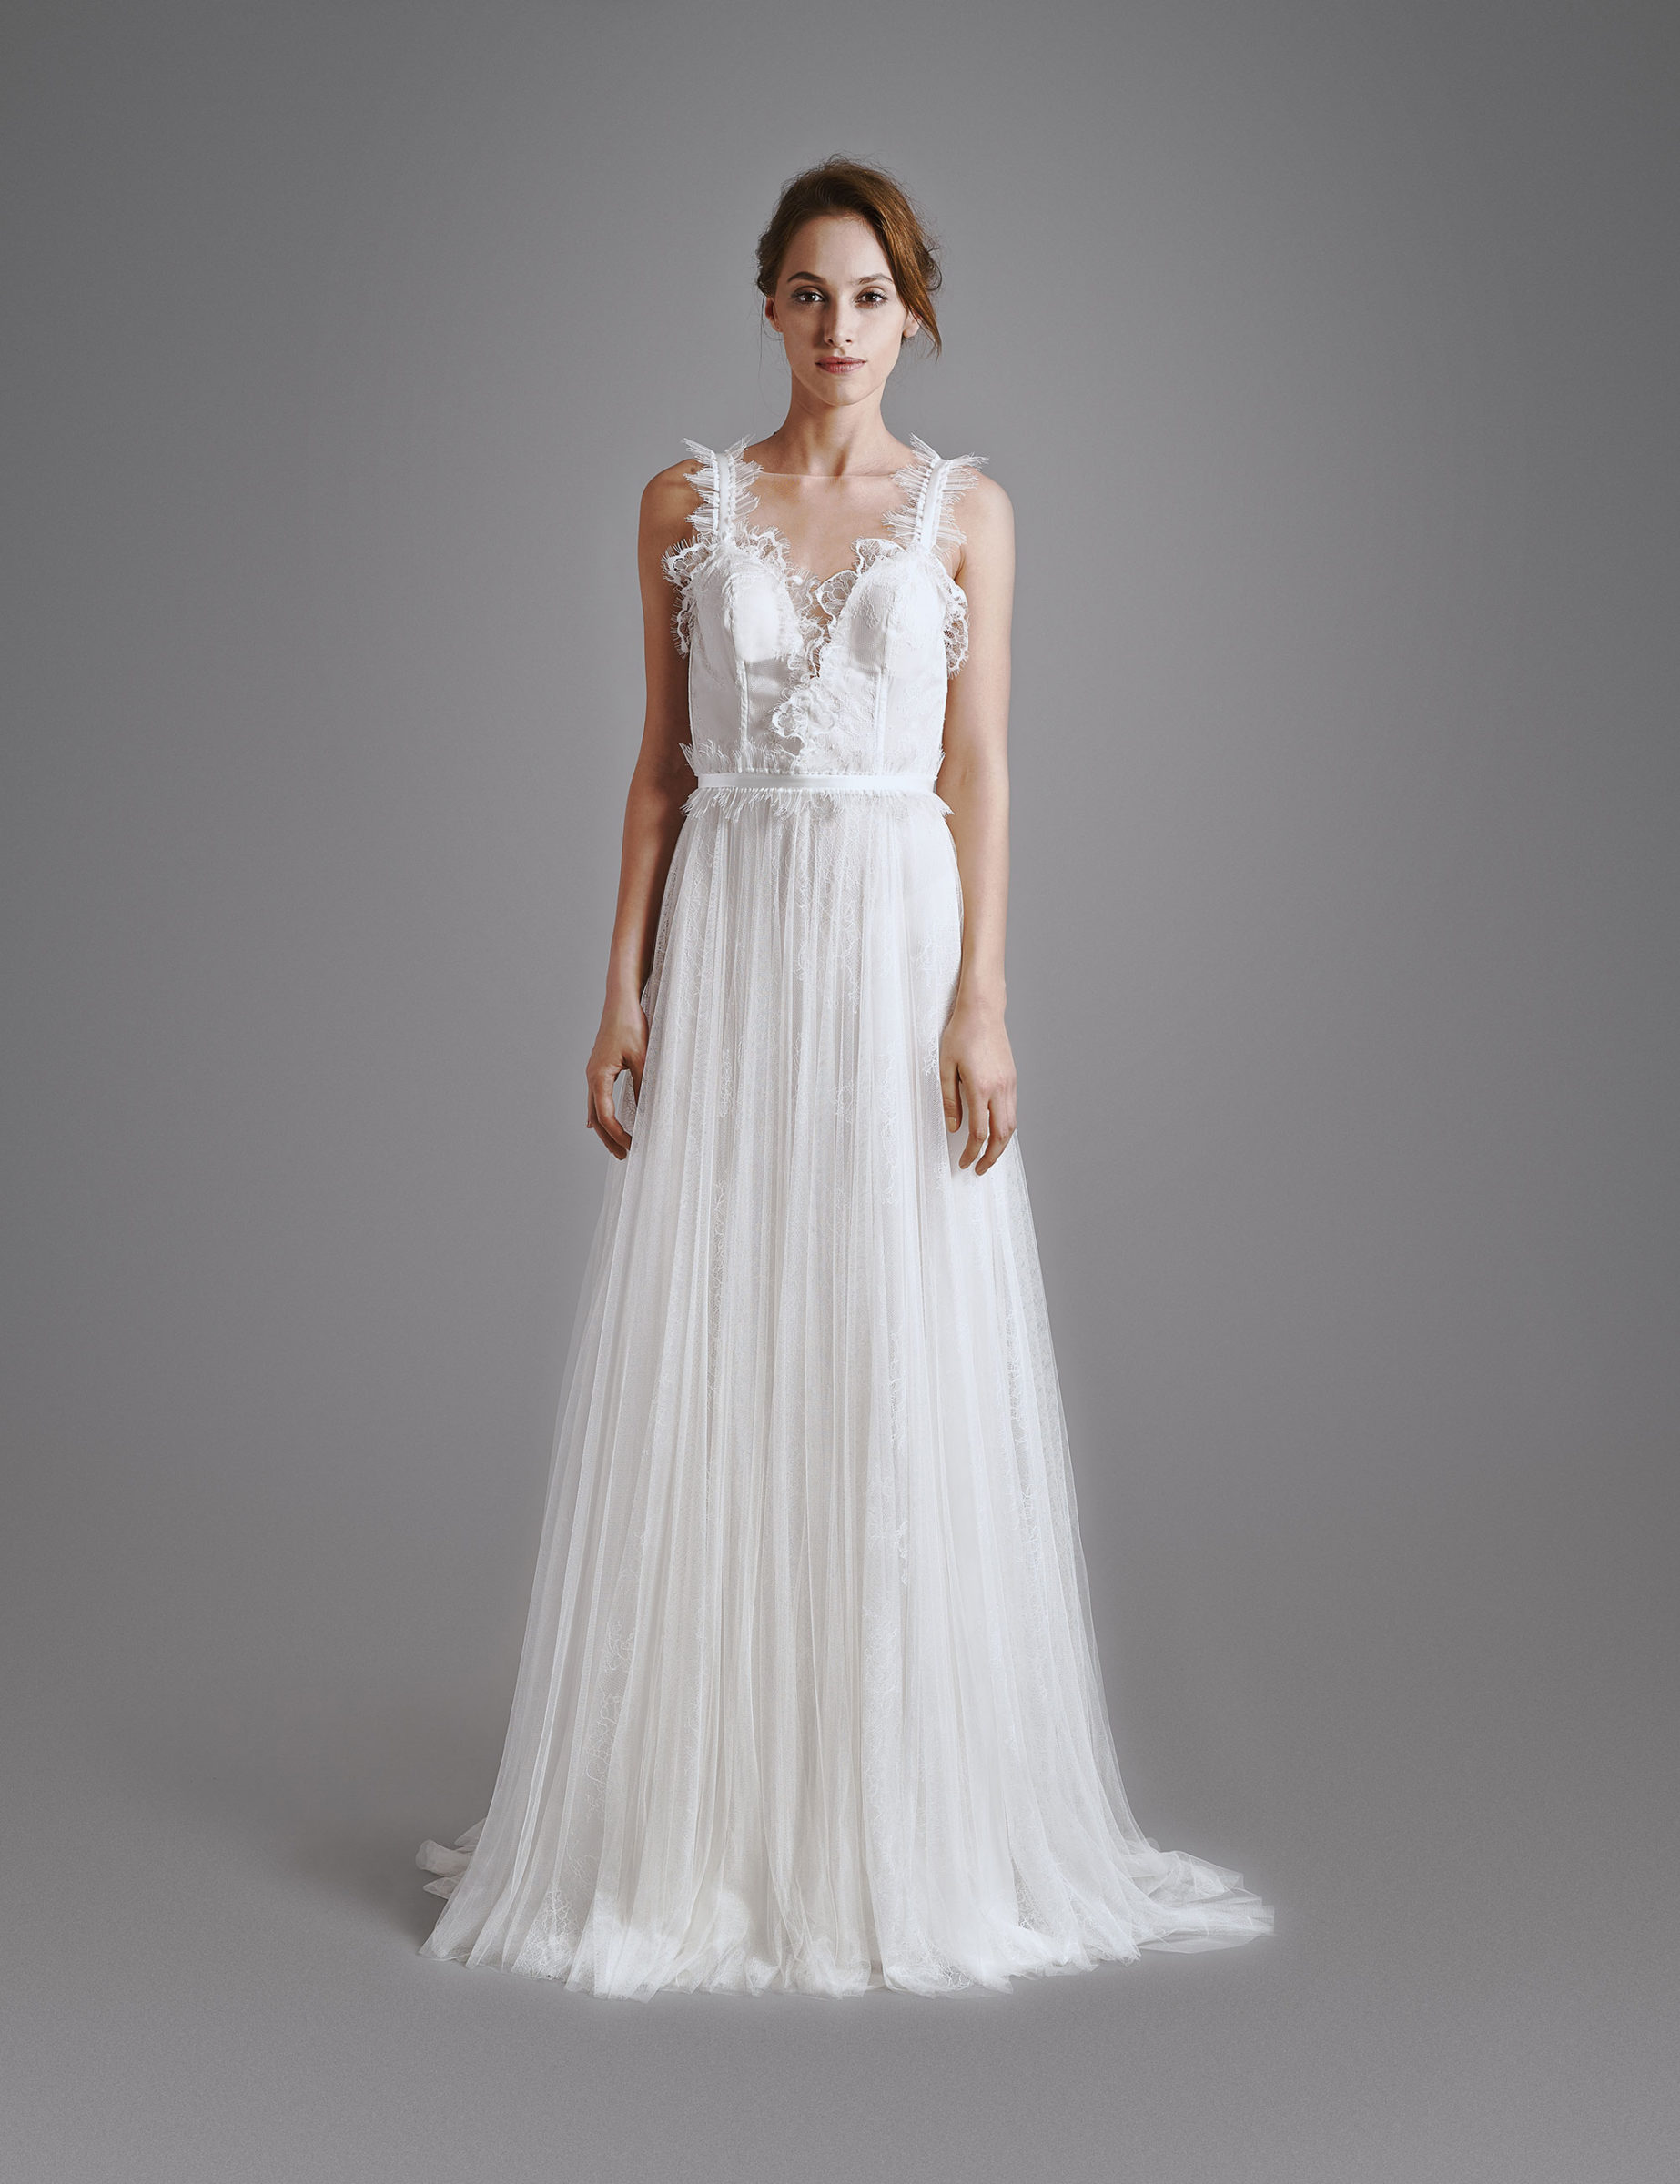 WILLOW BUTTERFLY BRIDAL GOWN - BHARB